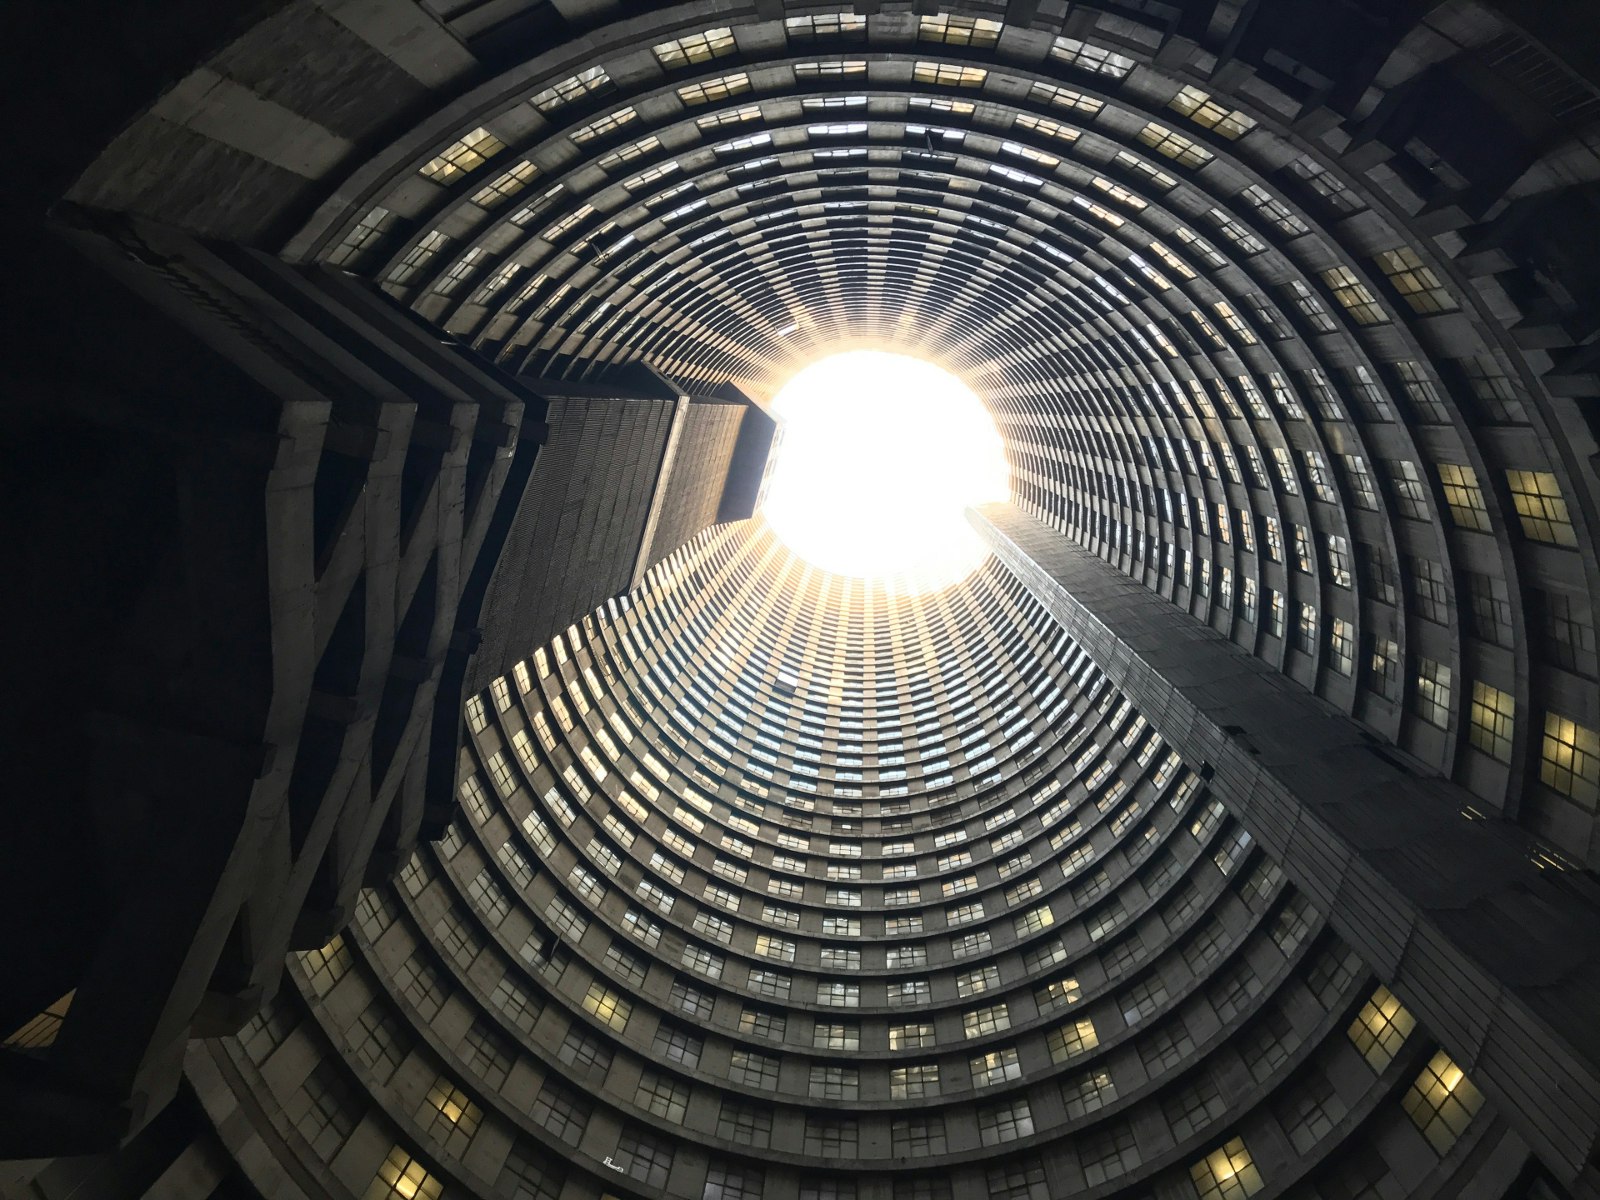 The picture is taken from inside the base of the 54-storey Ponte City tower, with the view looking up its cylindrical core to the circular hole at the top. The sky glows like a sun. © Simon Richmond / Lonely Planet